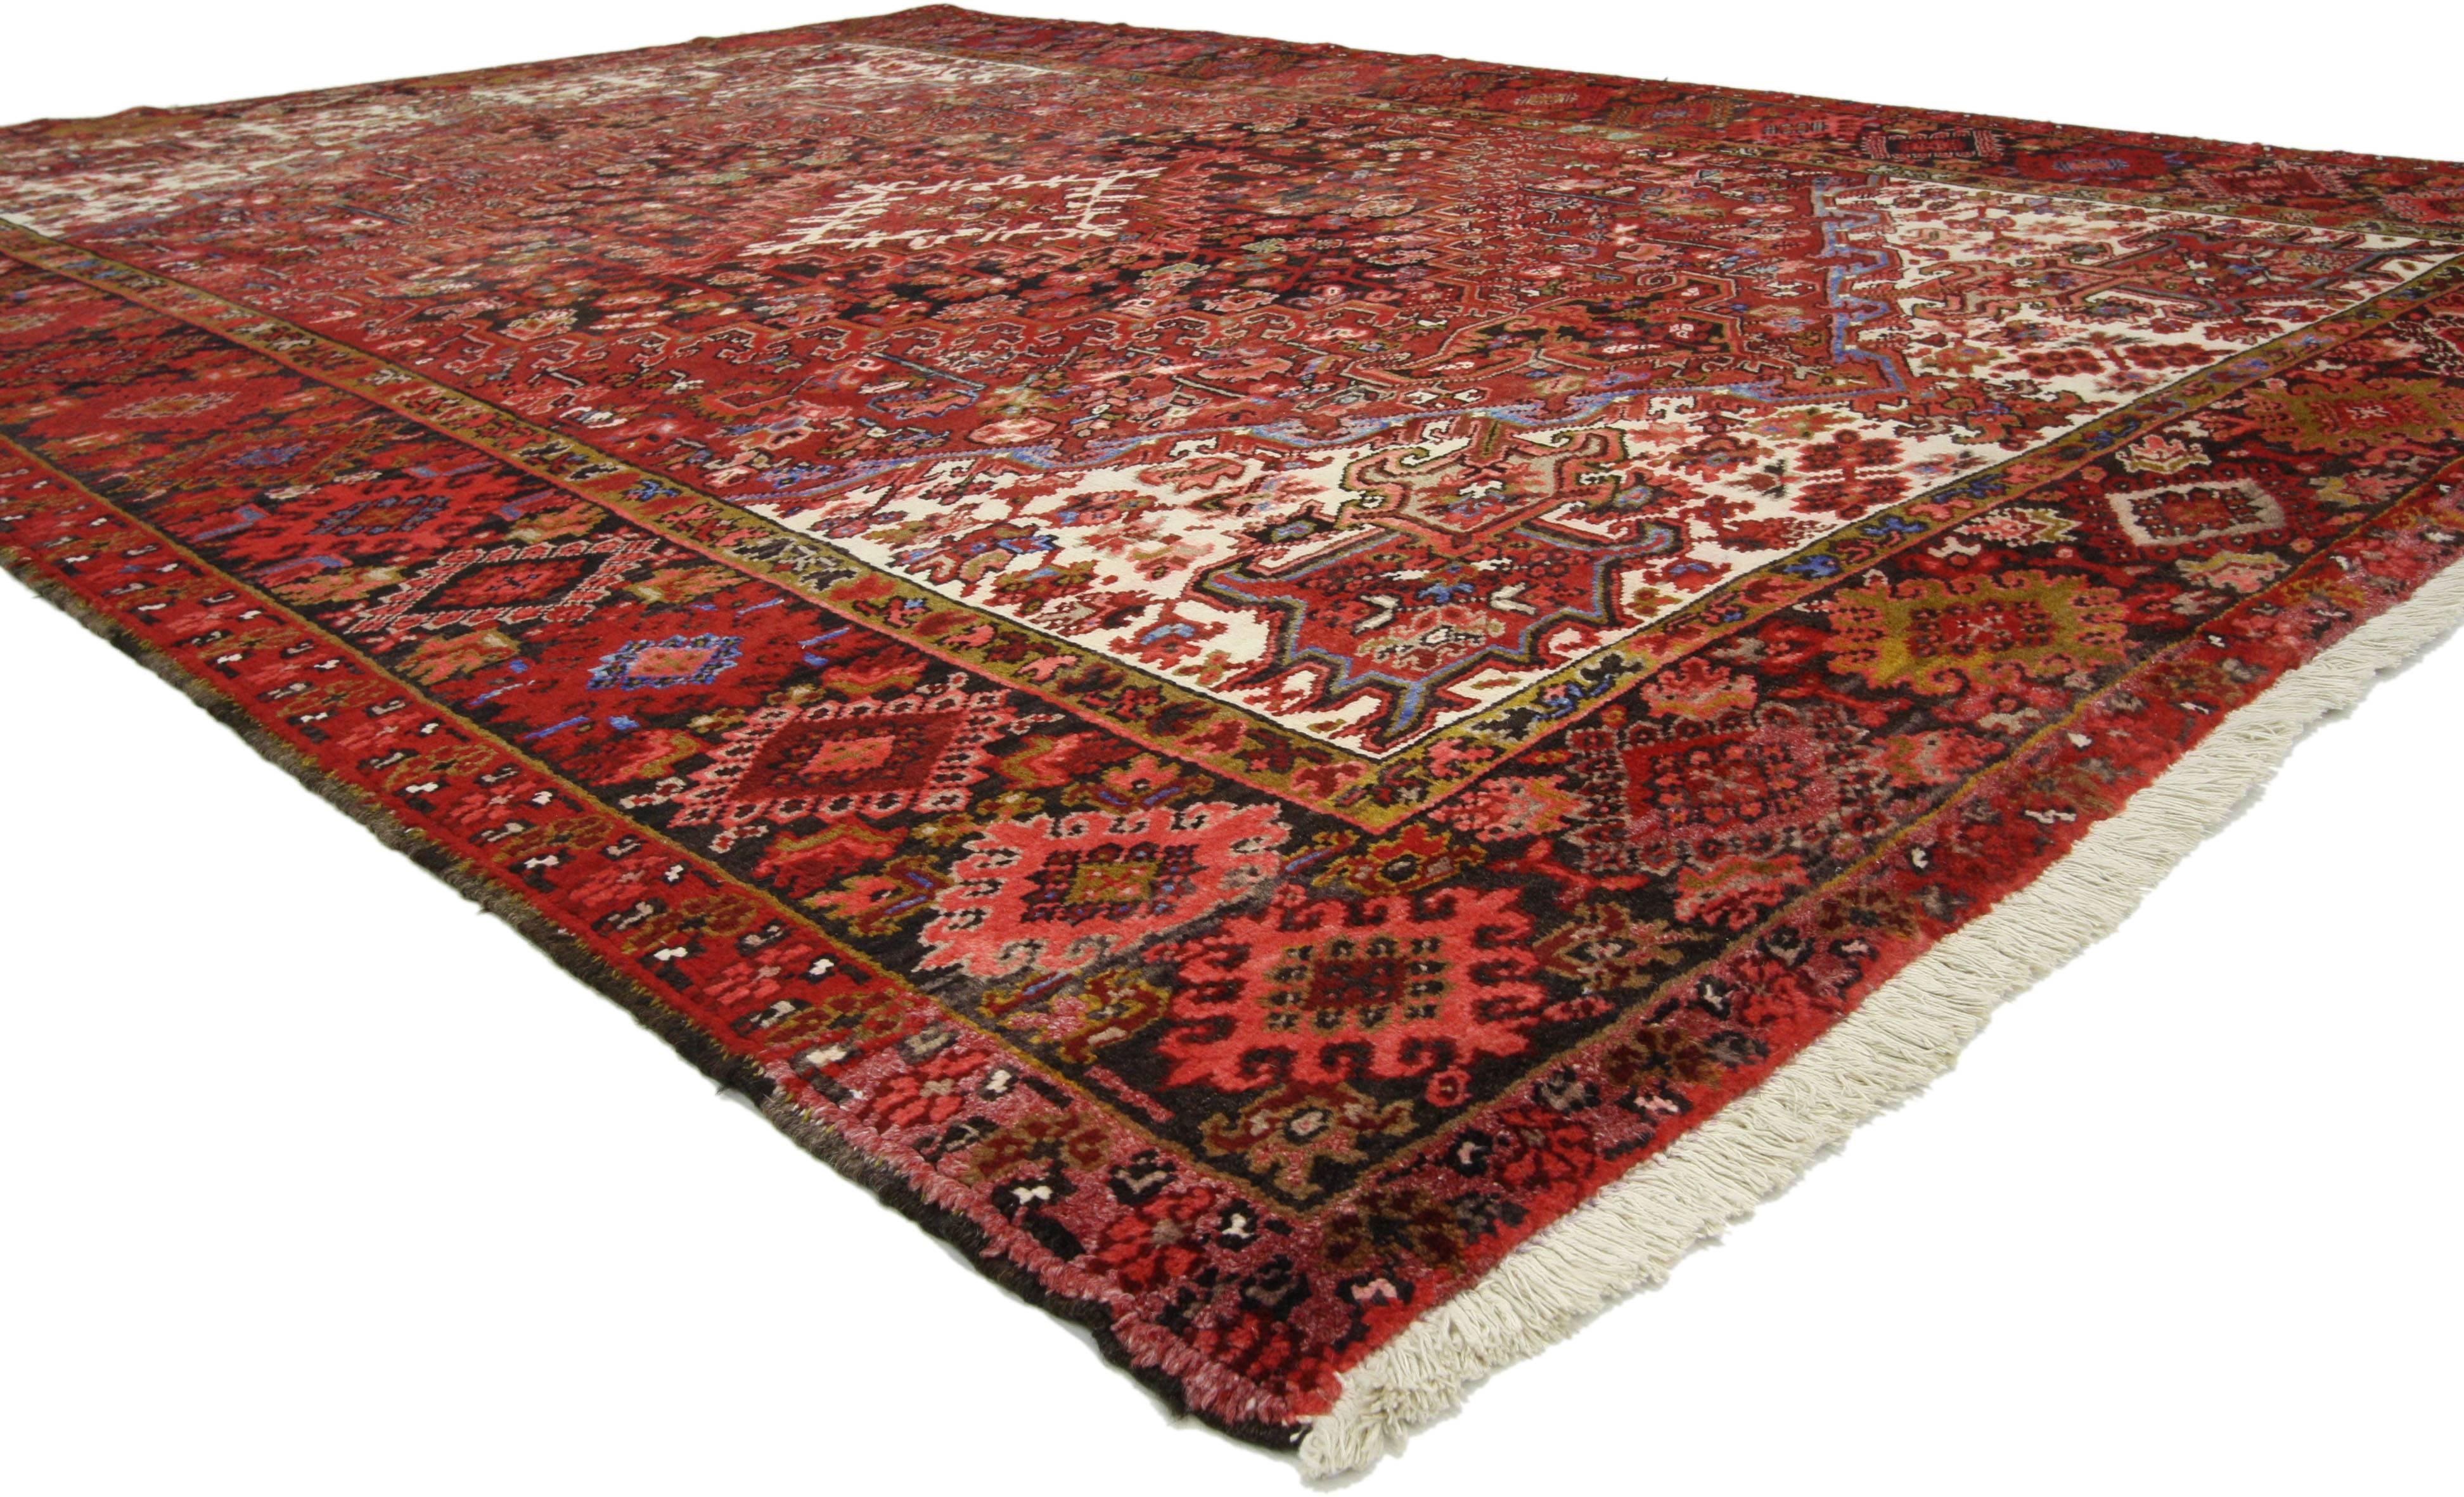 76189 Vintage Persian Heriz Rug with Mid-Century Modern Style 07'07 X 10'08. With its striking appeal and saturated red color palette, this hand-knotted wool vintage Persian Heriz rug appears like a sumptuous Italian velvet, recalling the rich and